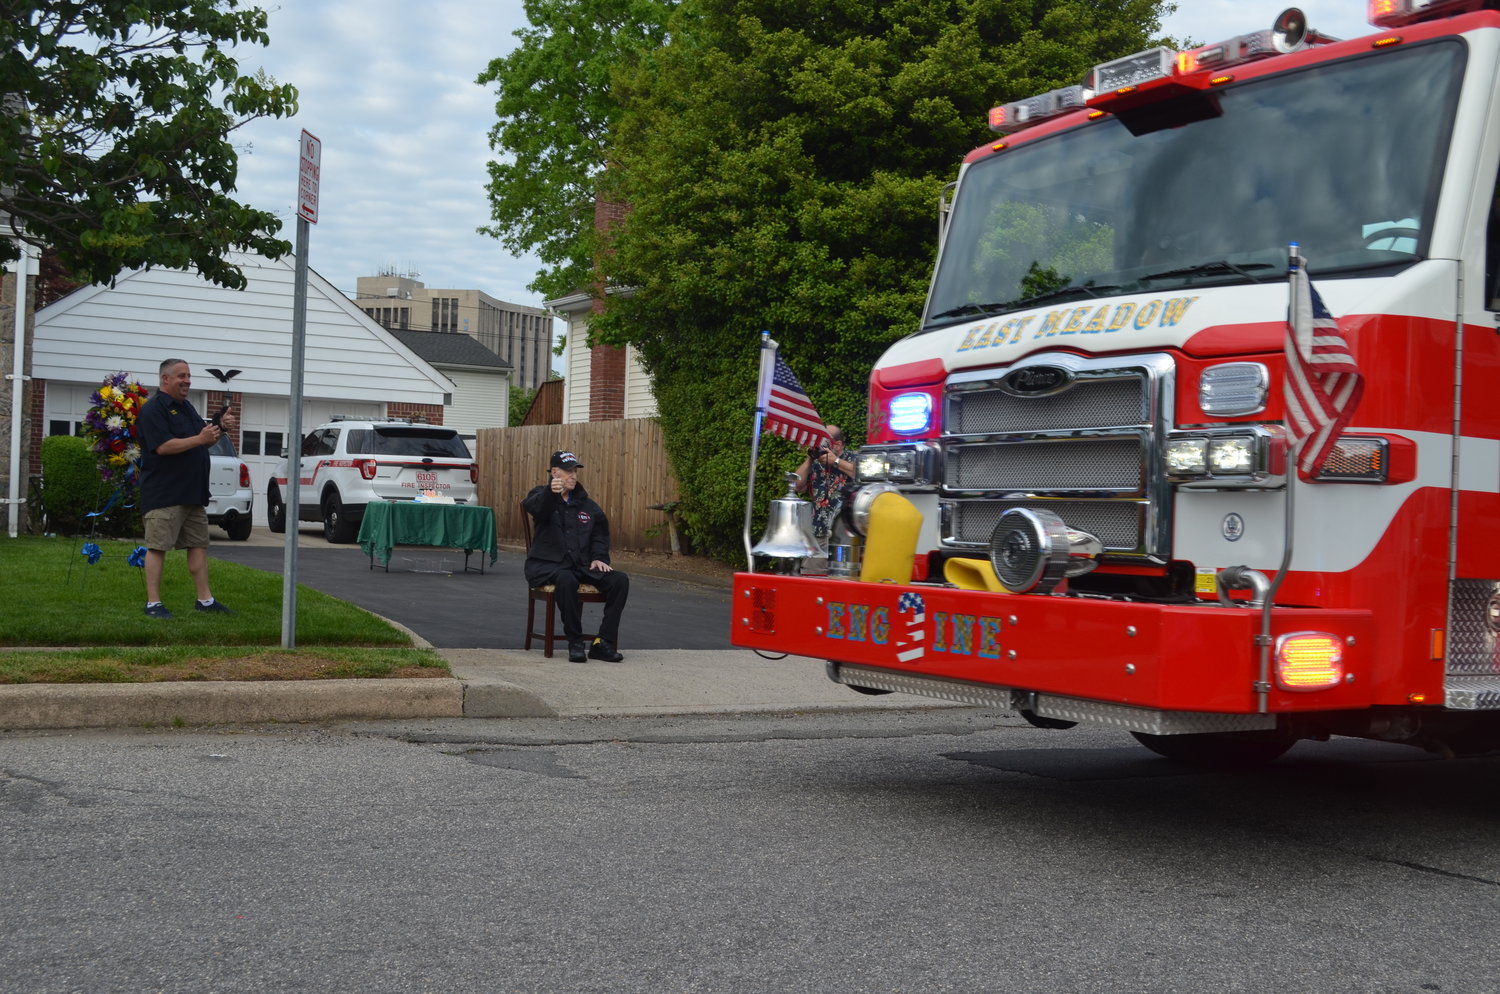 Butera has been a member of the EMFD for 70 years, and is its oldest member.